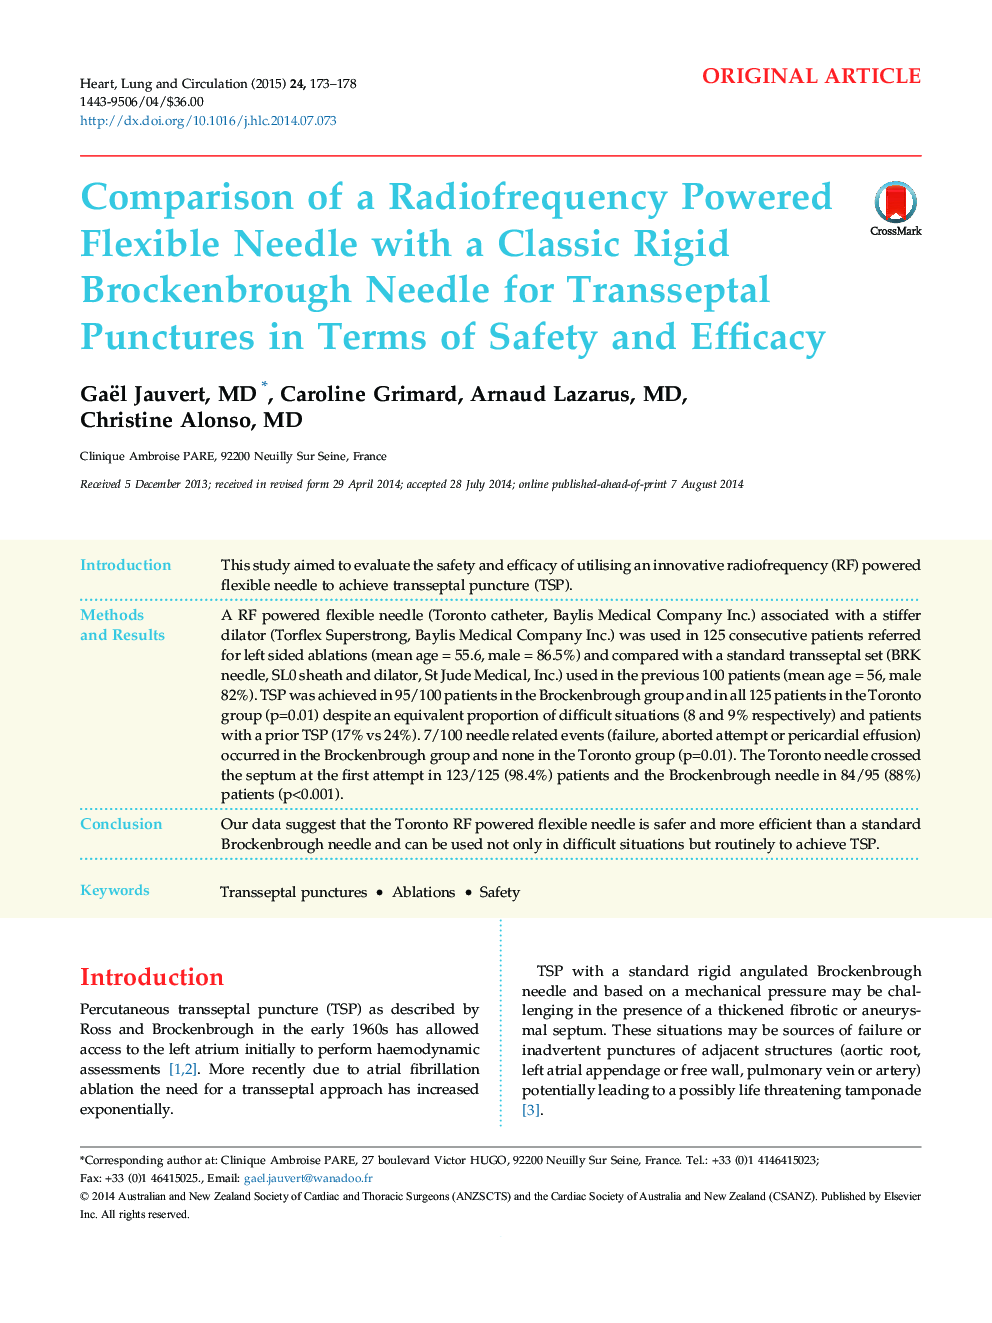 Comparison of a Radiofrequency Powered Flexible Needle with a Classic Rigid Brockenbrough Needle for Transseptal Punctures in Terms of Safety and Efficacy